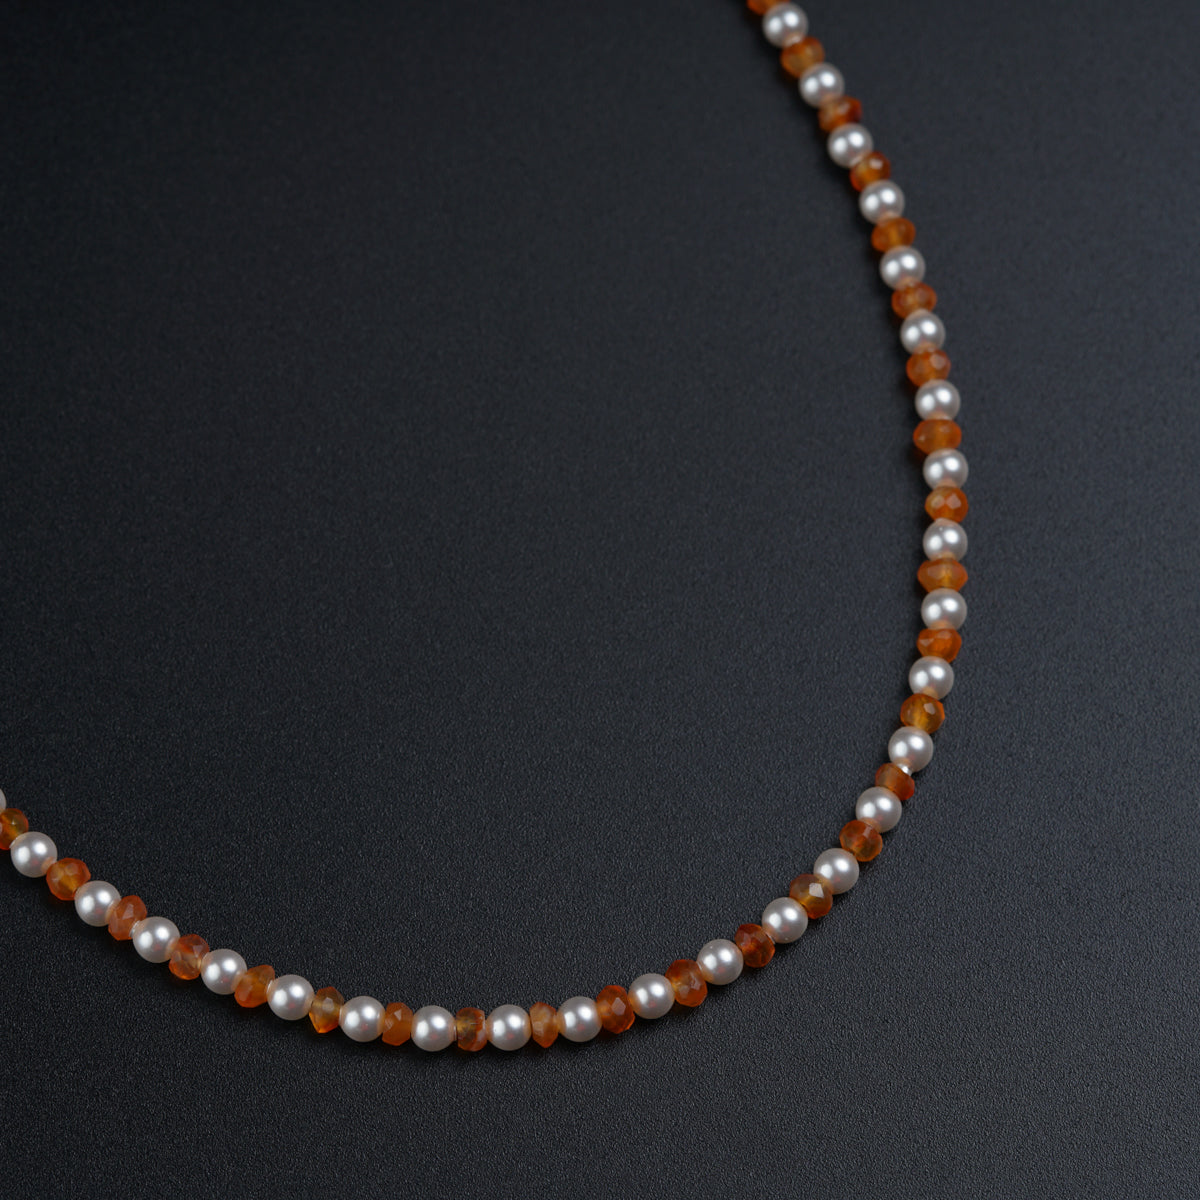 a beaded necklace with silver and orange beads